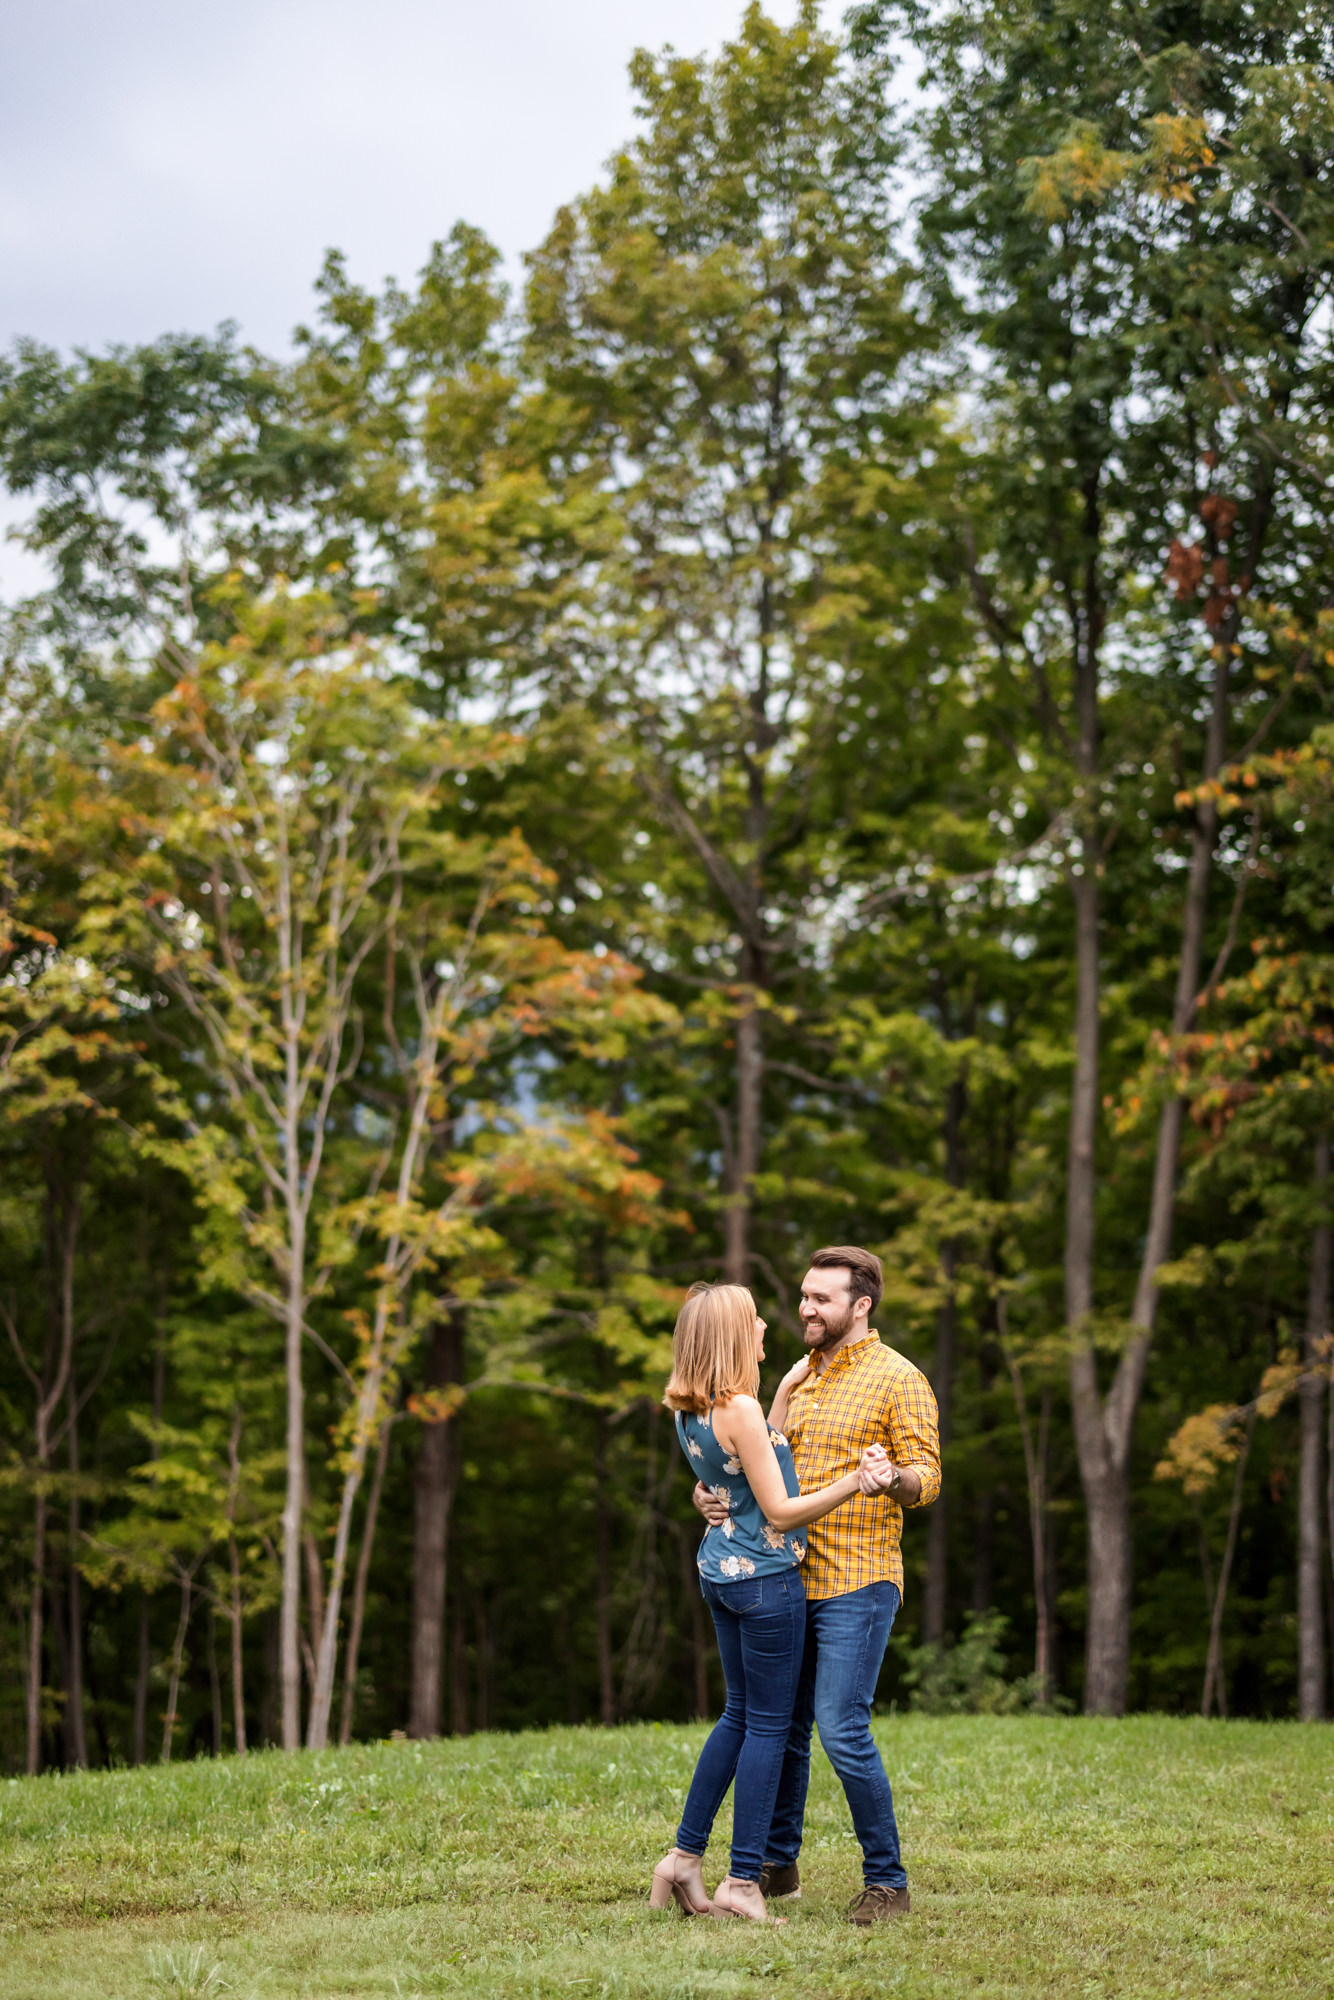 couple dancing in field by trees